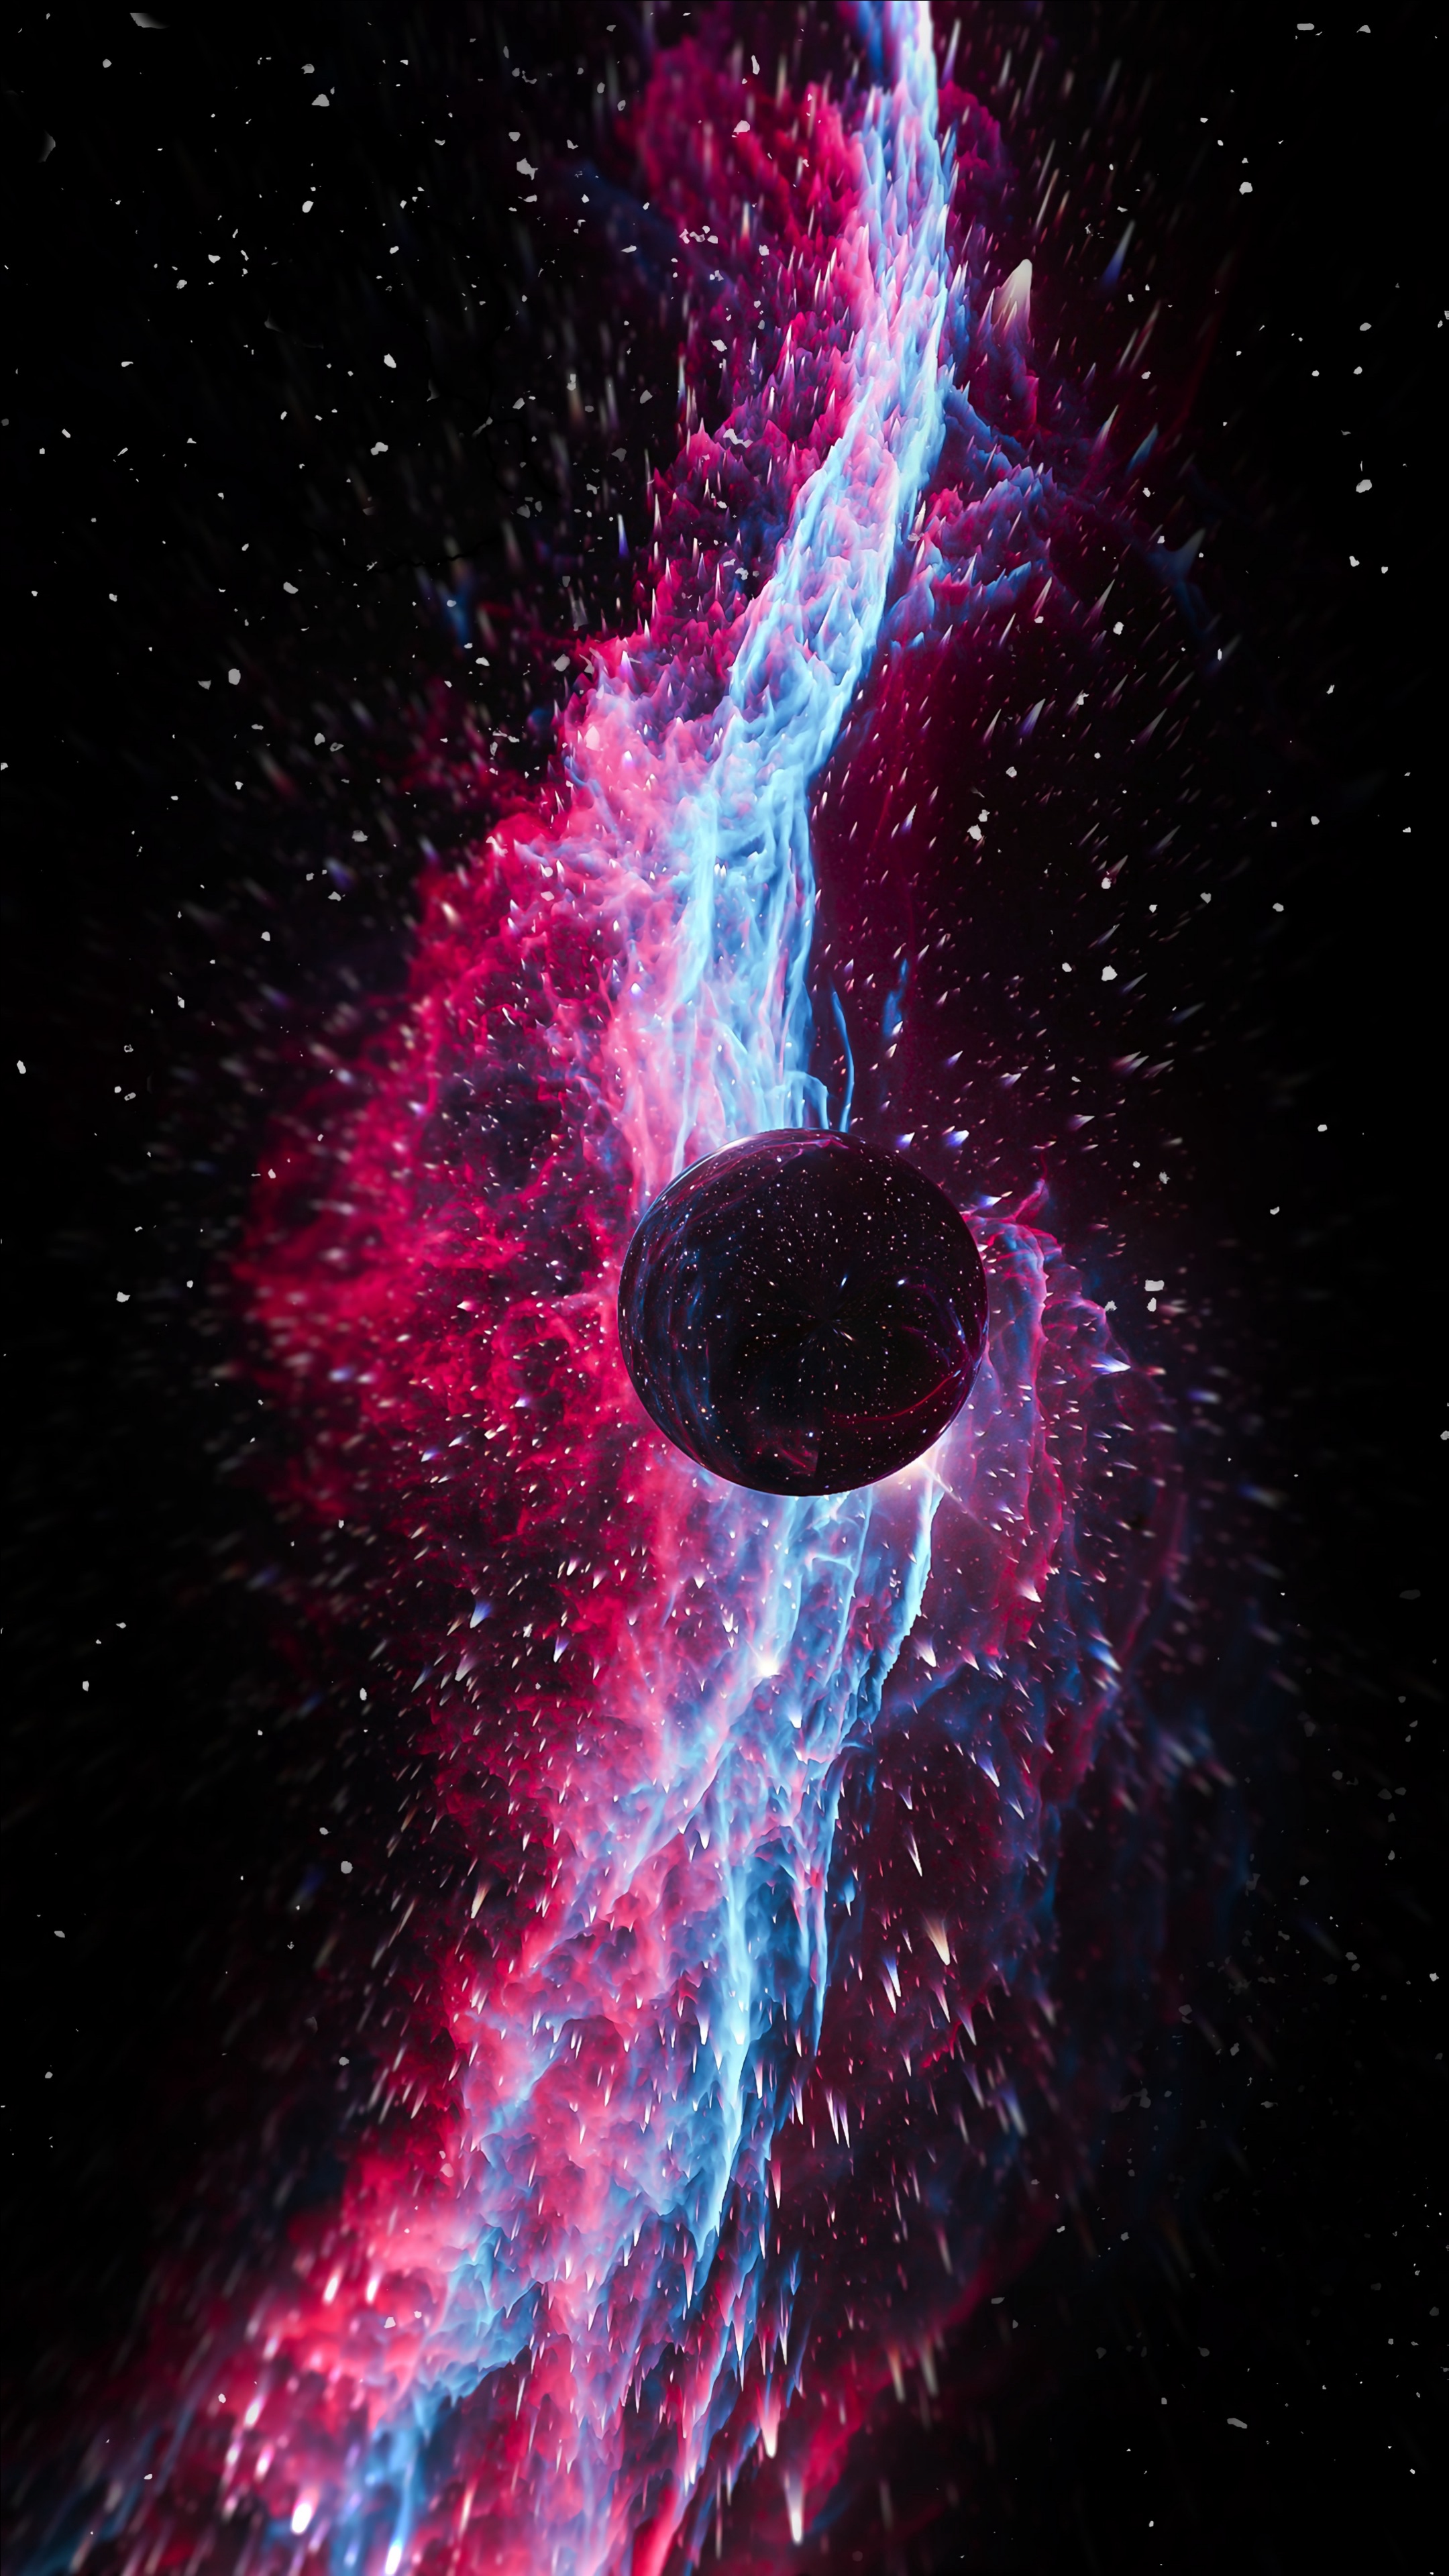 3d, ball, bright, flight, cosmic explosion, space explosion High Definition image